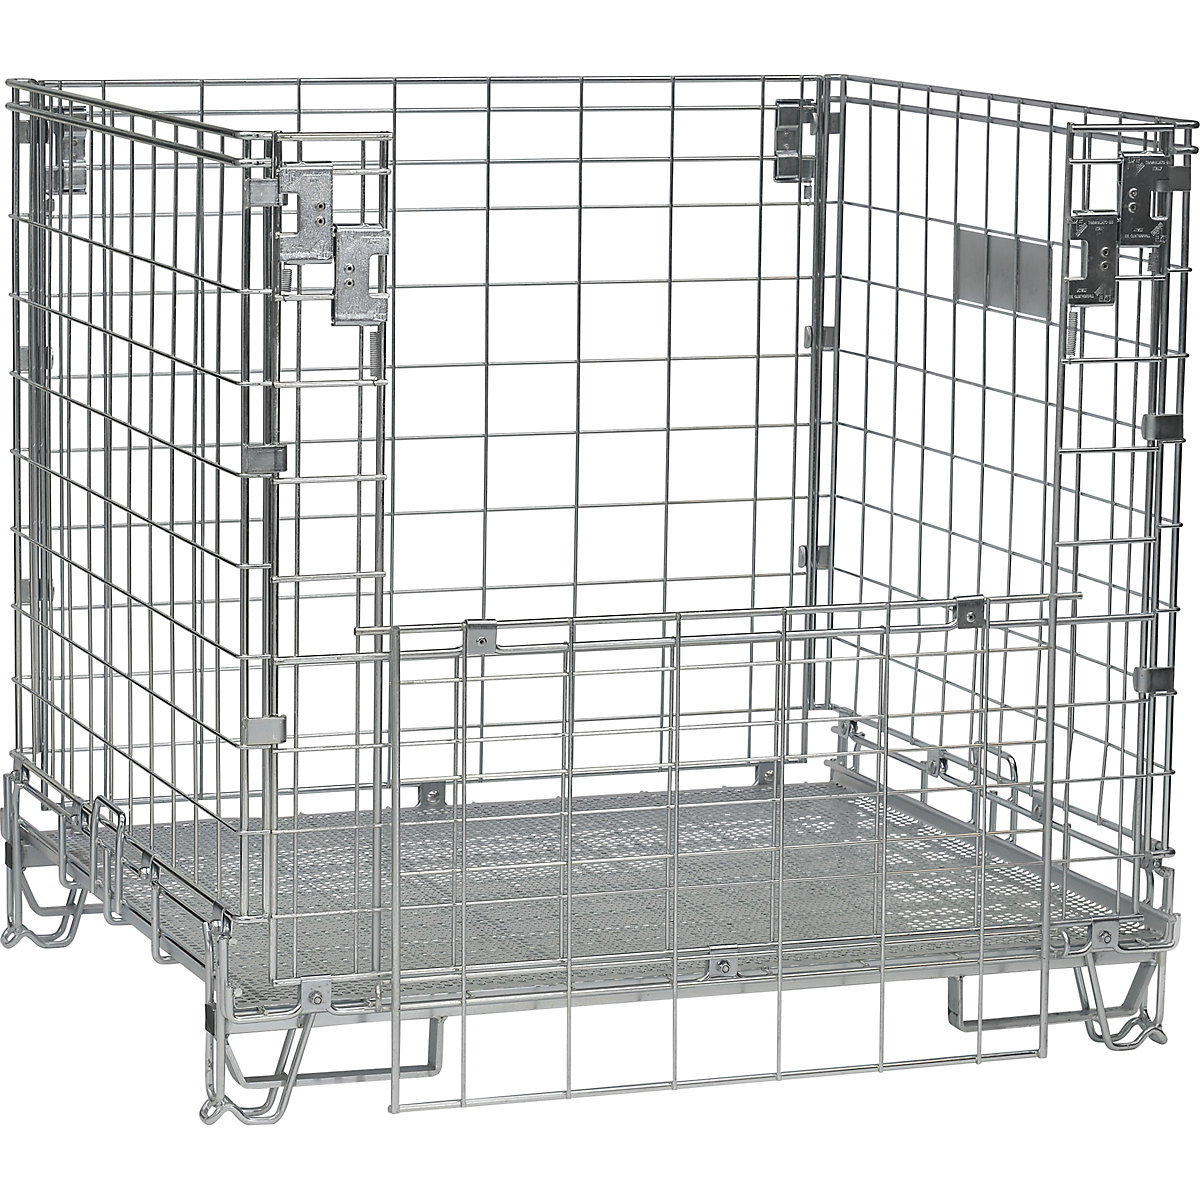 Collapsible mesh pallet, LxW 1200 x 1000 mm, stacking height 1100 mm, weight 56 kg-1